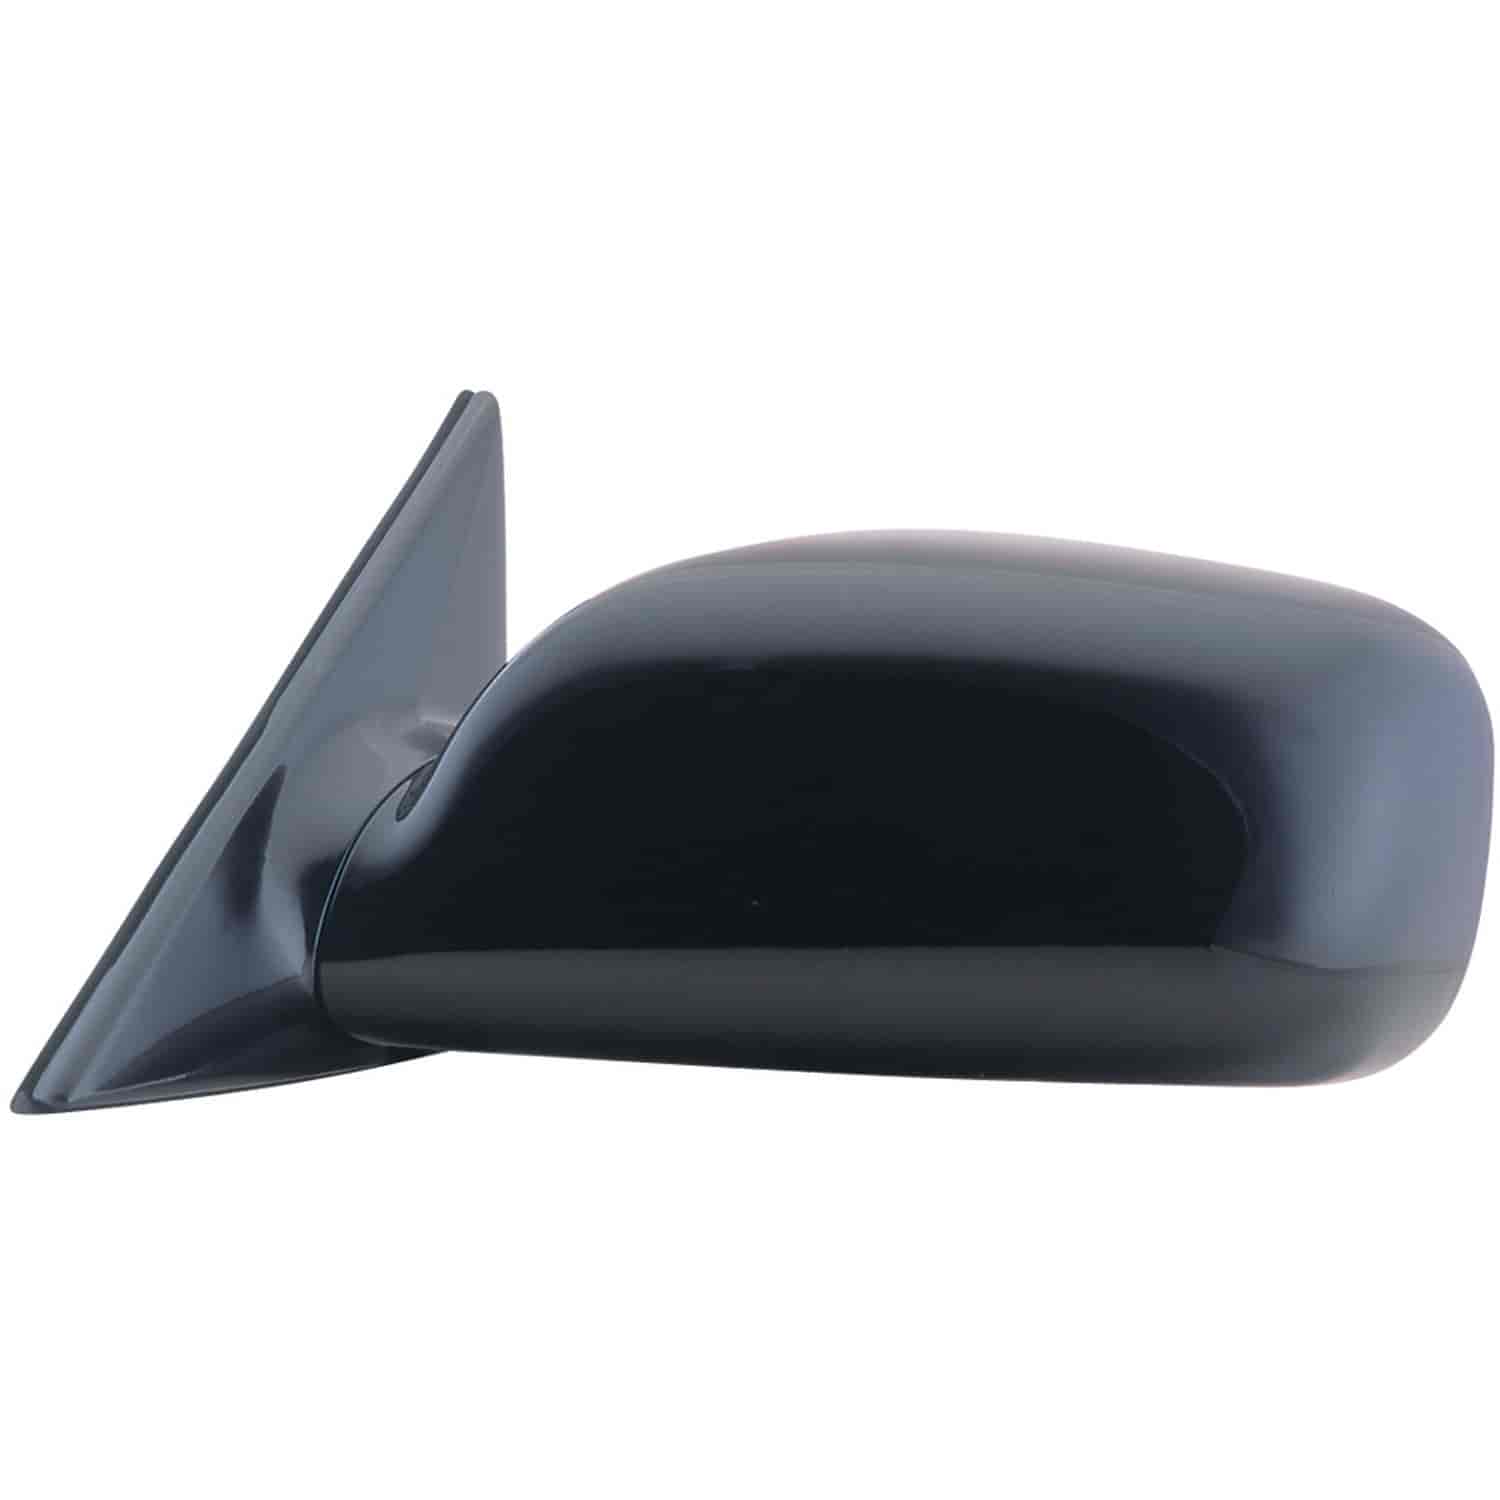 OEM Style Replacement mirror for 02-06 Toyota Camry US built driver side mirror tested to fit and fu